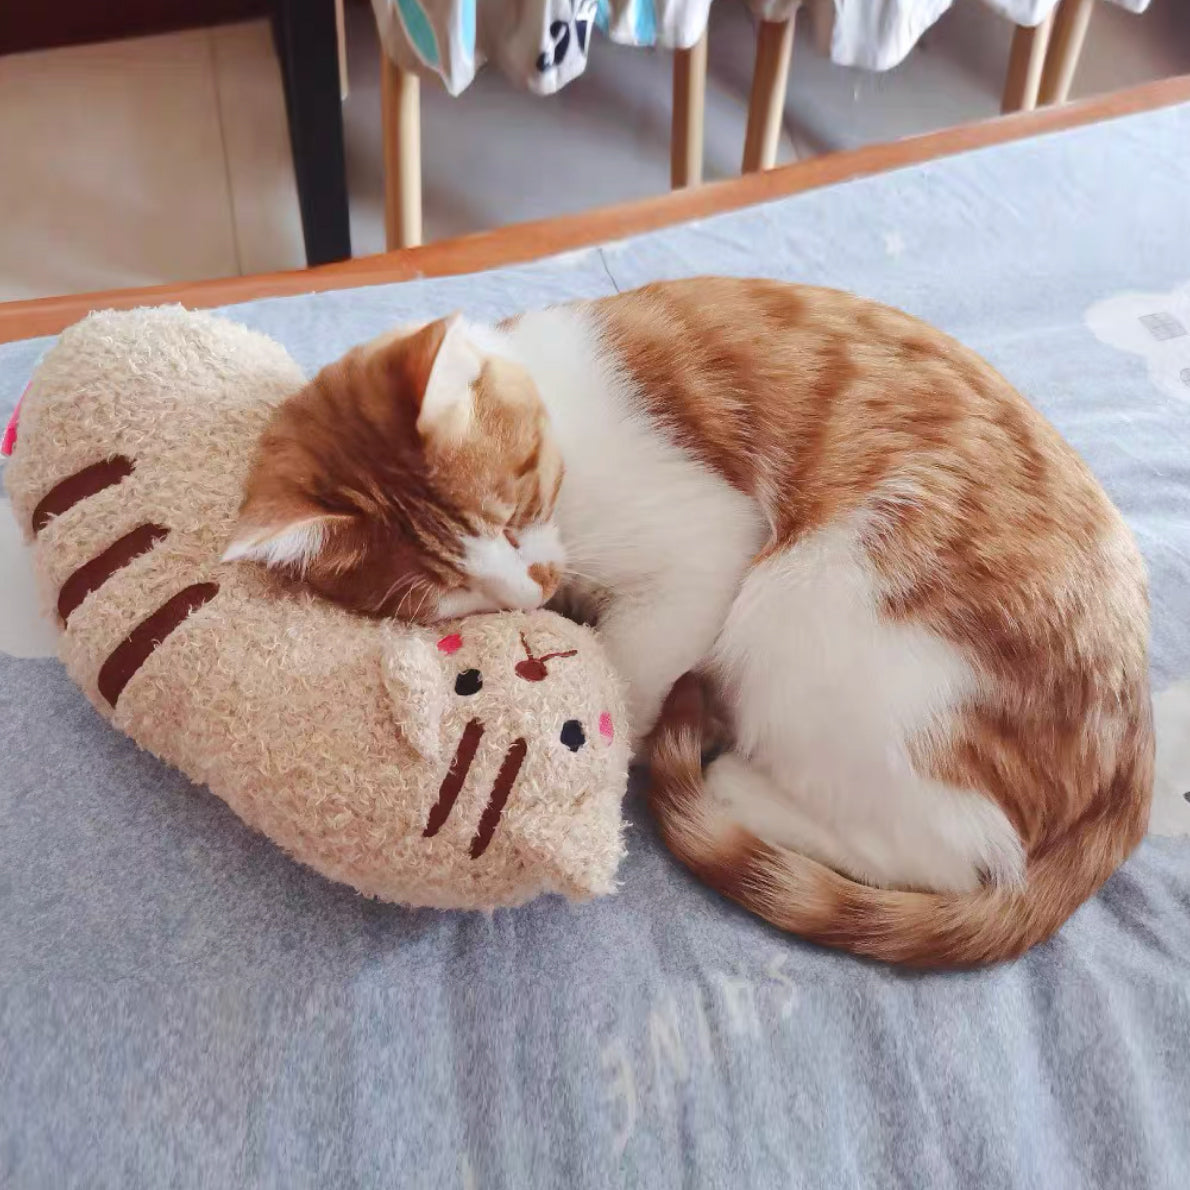 ⚡⚡Last Day Promotion 48% OFF - Cat Lovely Cozy Pillow🔥🔥BUY 2 GET 2 FREE